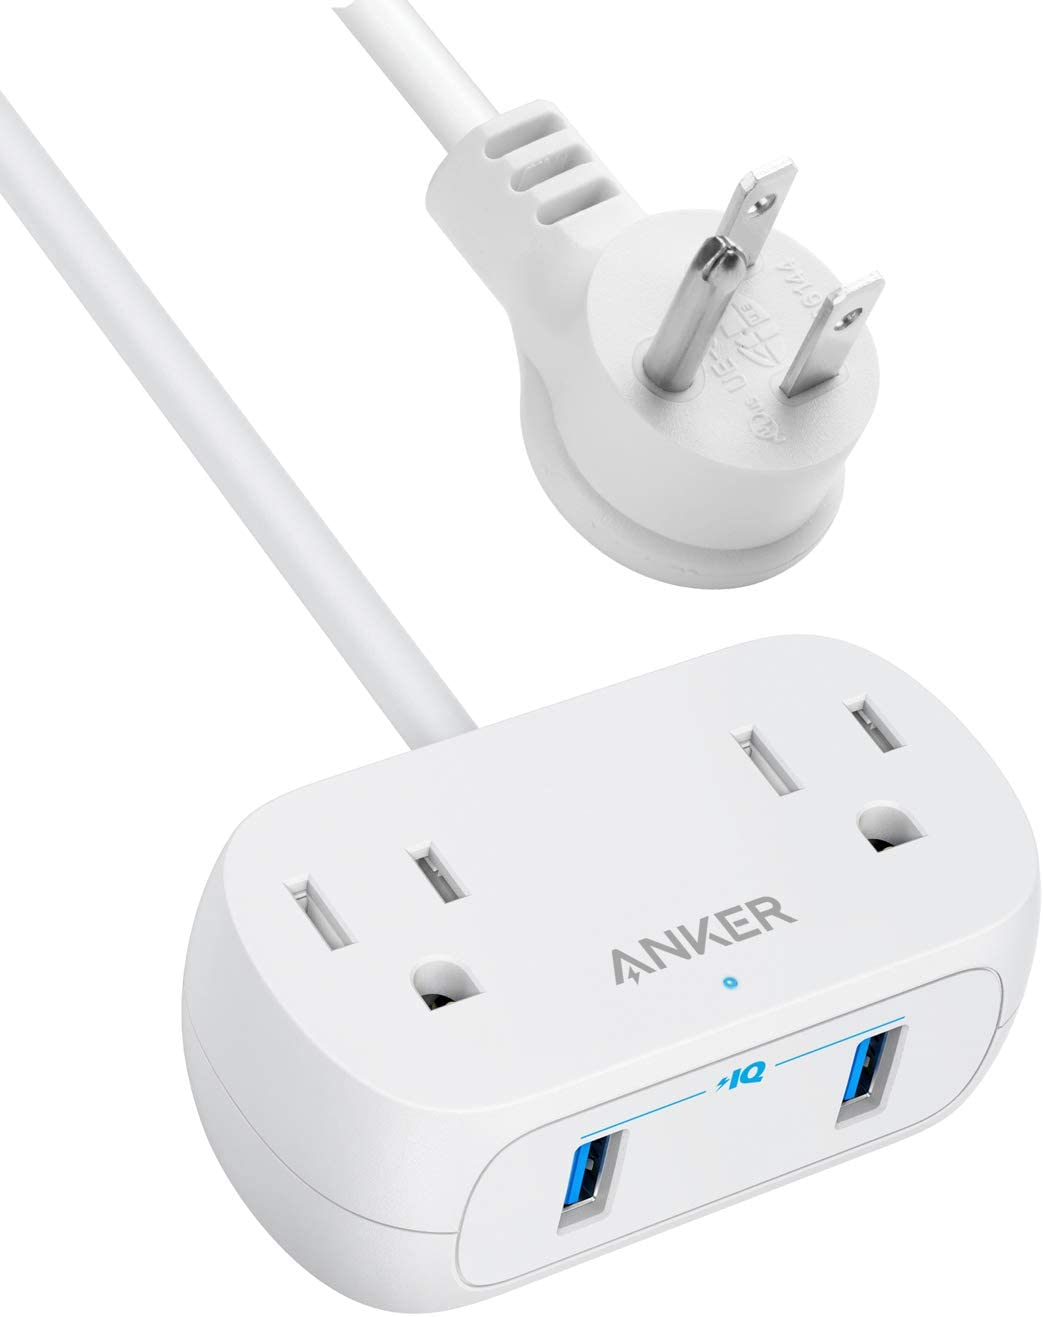 5' Anker Power Strip w/ 2 Outlets & 2 USB Ports $9.99 + Free Prime Shipping or $25+ orders